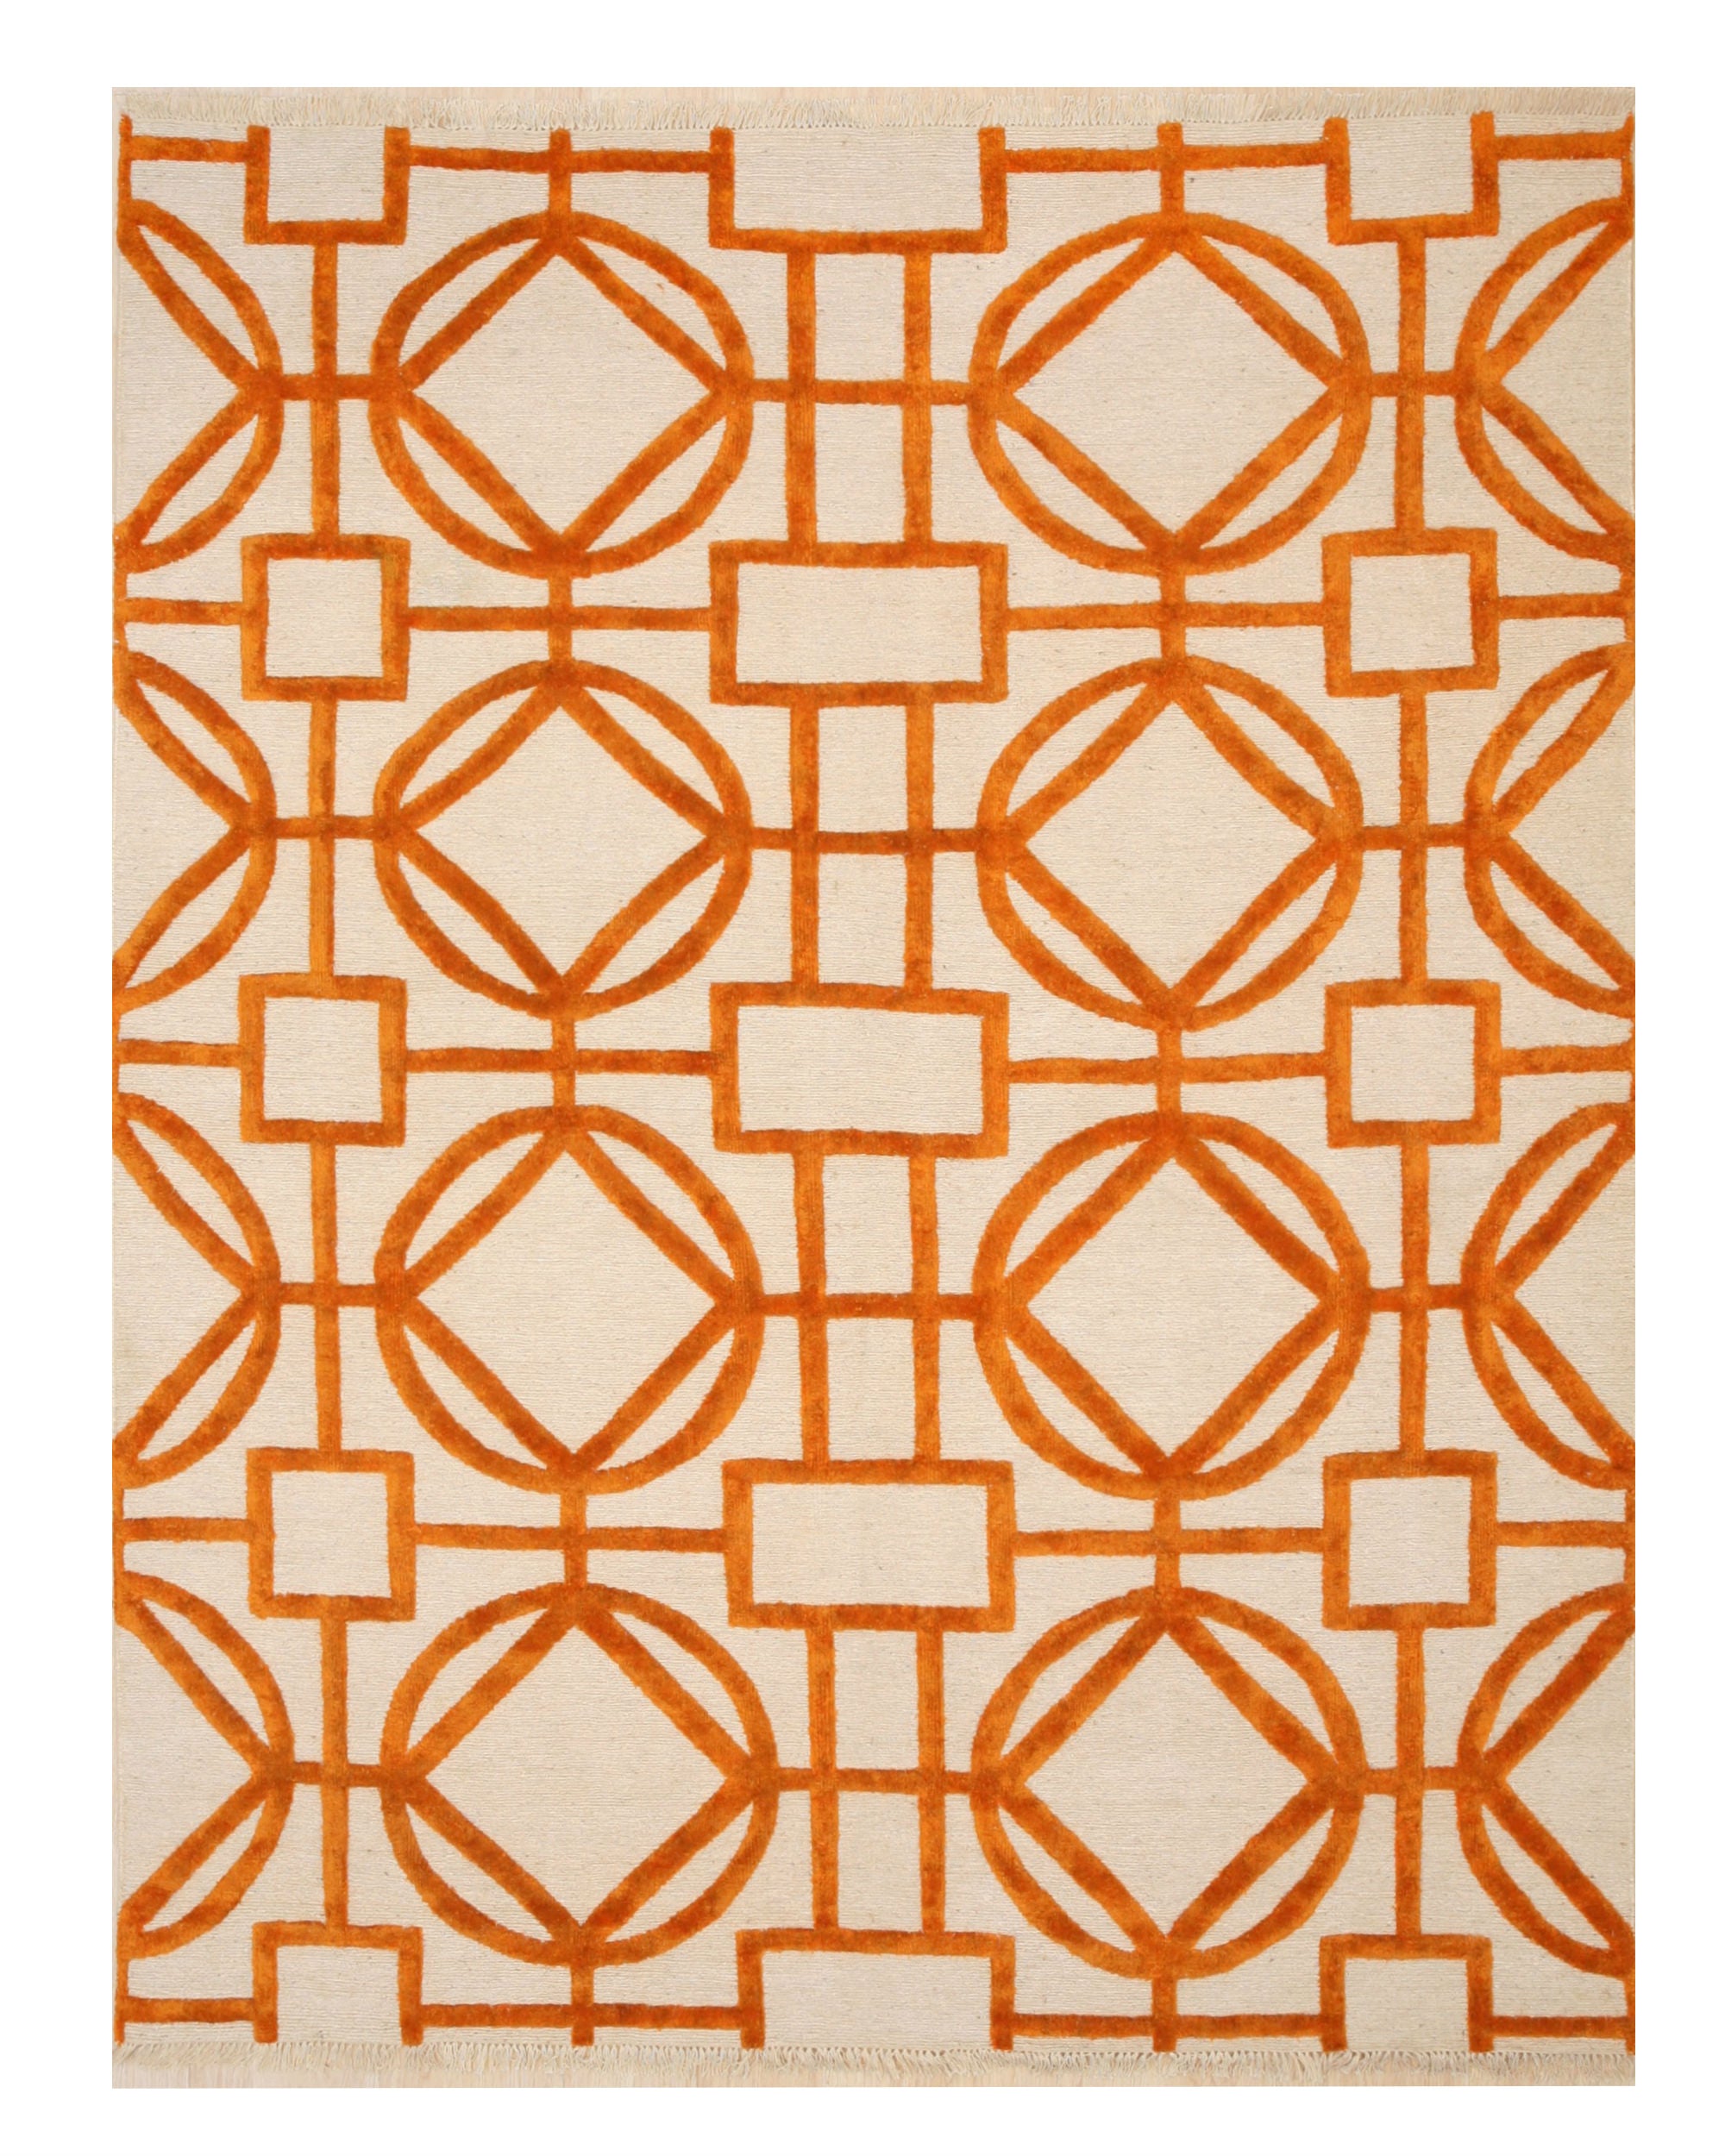 EORC Hand-knotted Wool & Viscose Ivory Transitional Geometric Links Rug